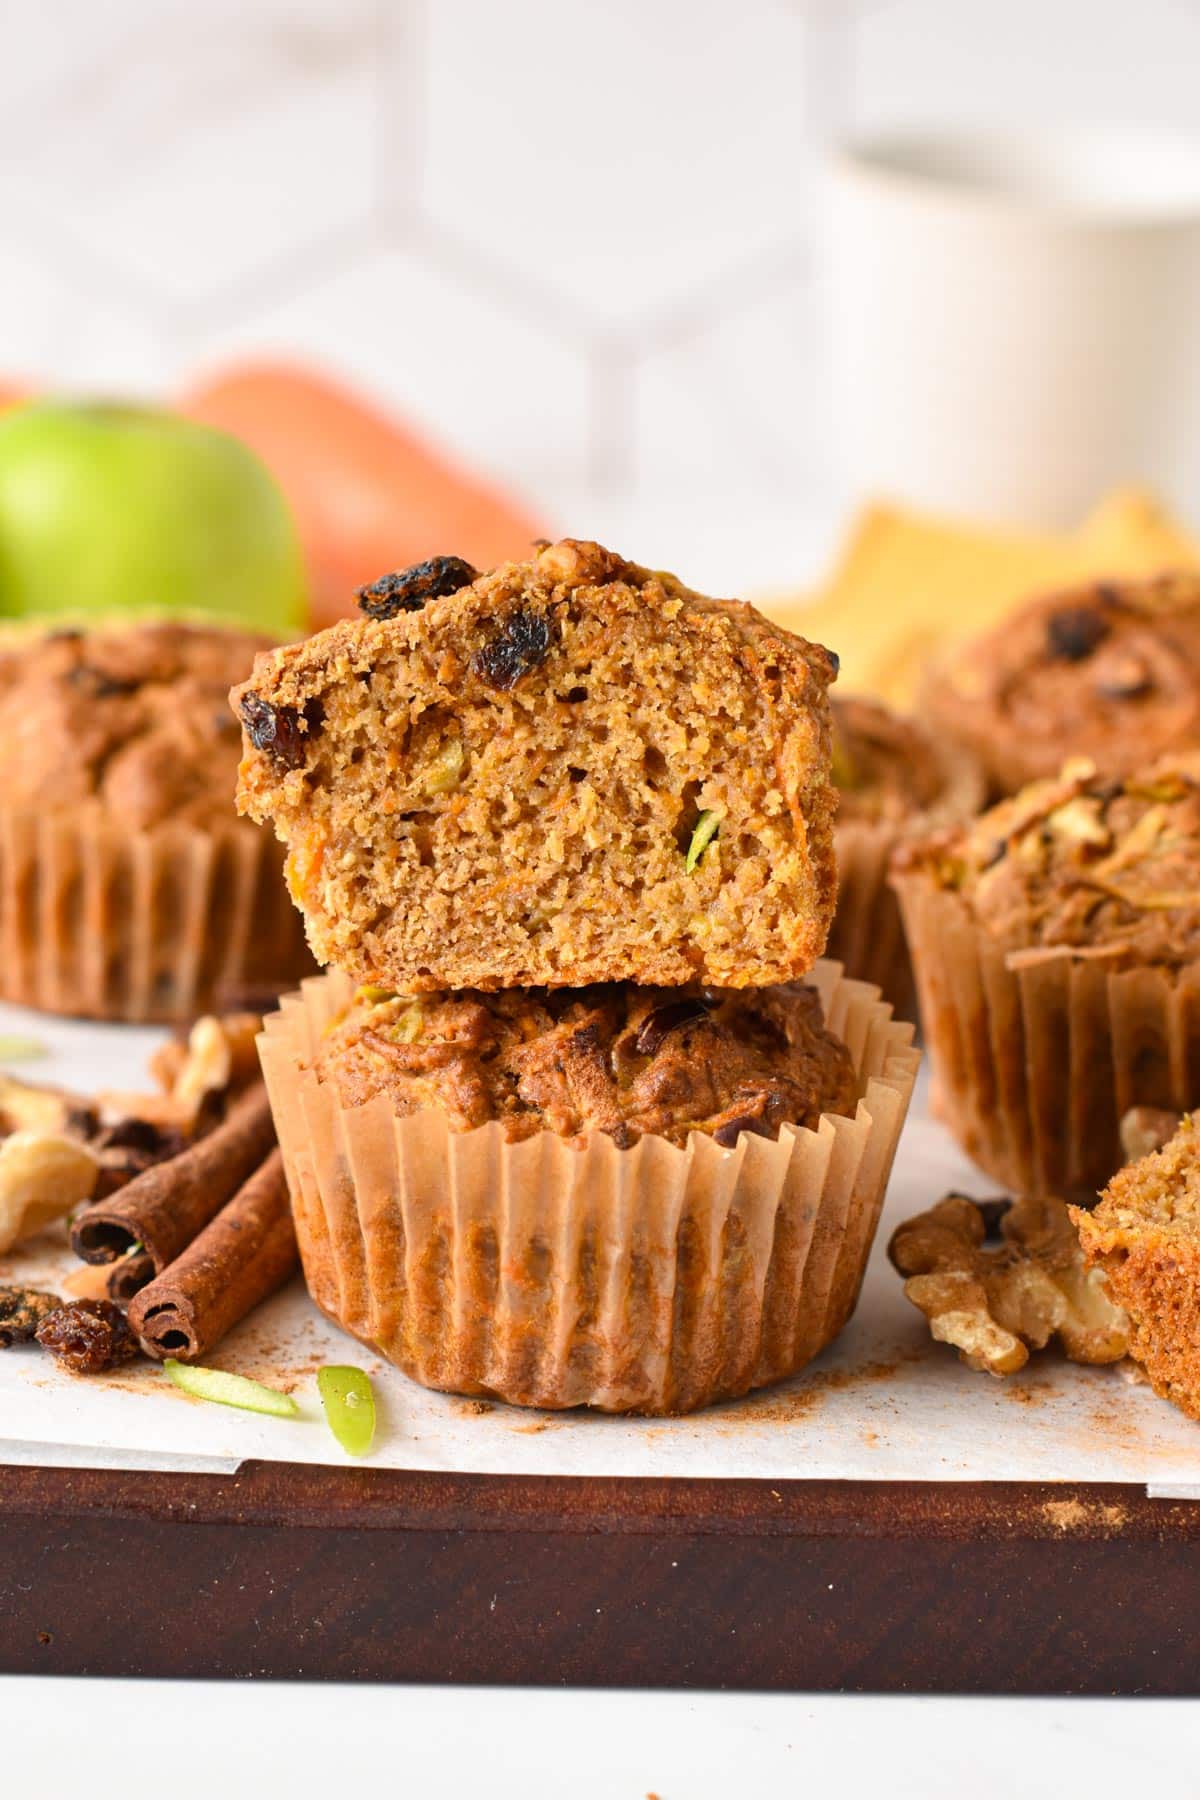 A stack of vegan Morning Glory Muffins, sliced in half and filled with carrots, raisins, and green apples.